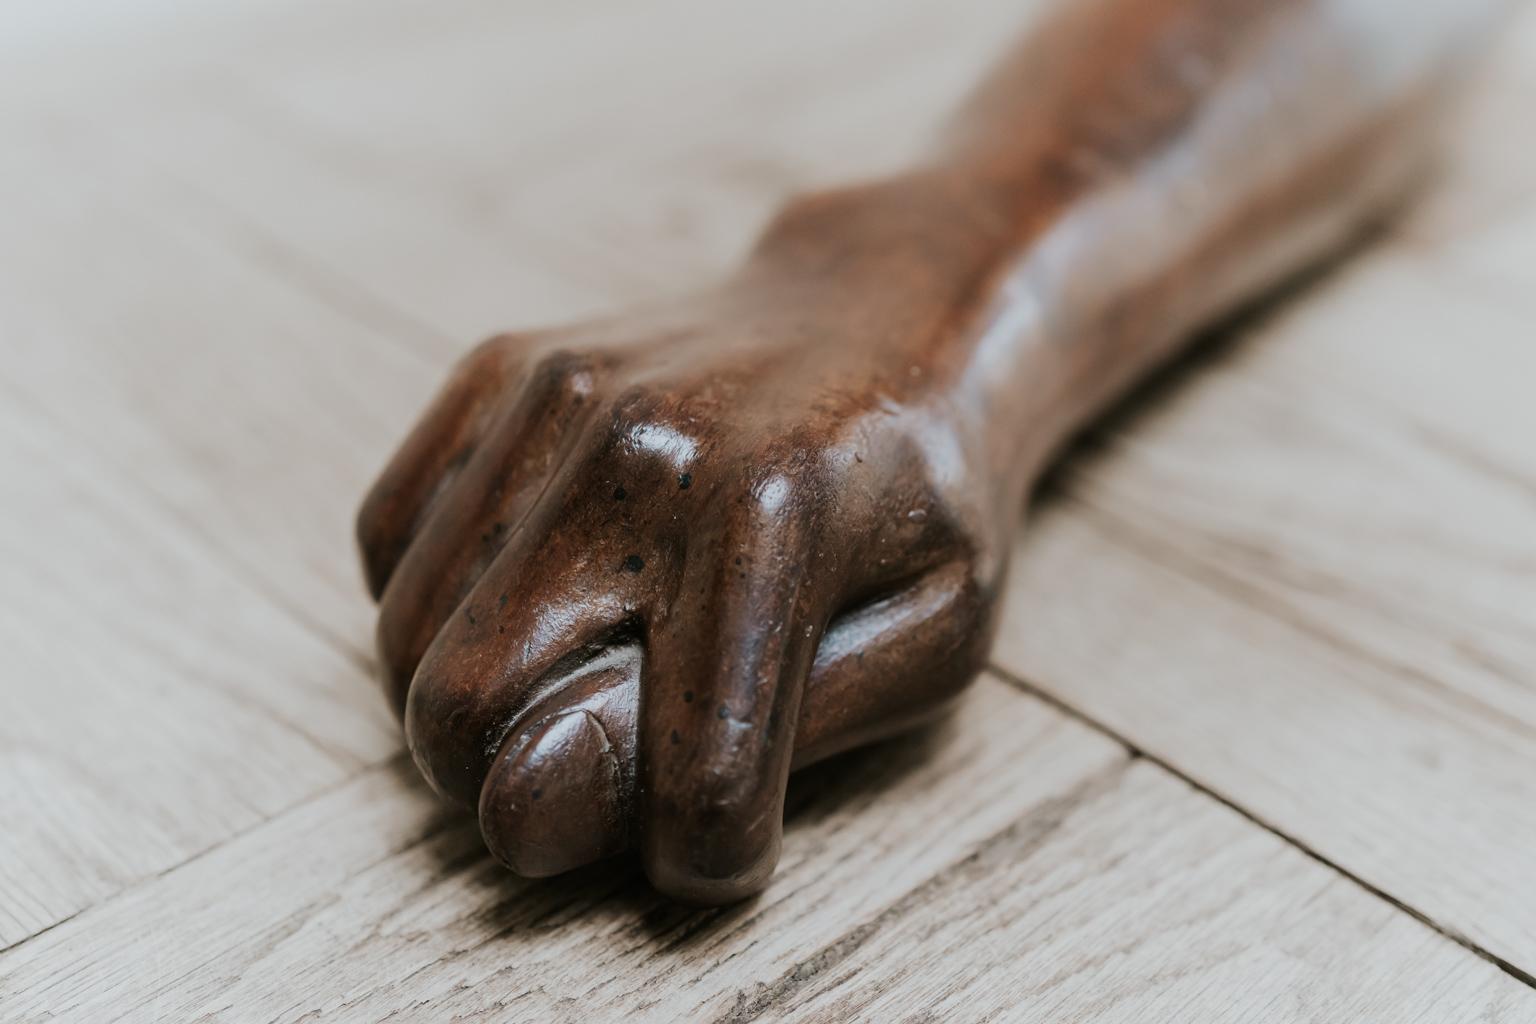 Quirky object this wooden arm and hand. Great patina.